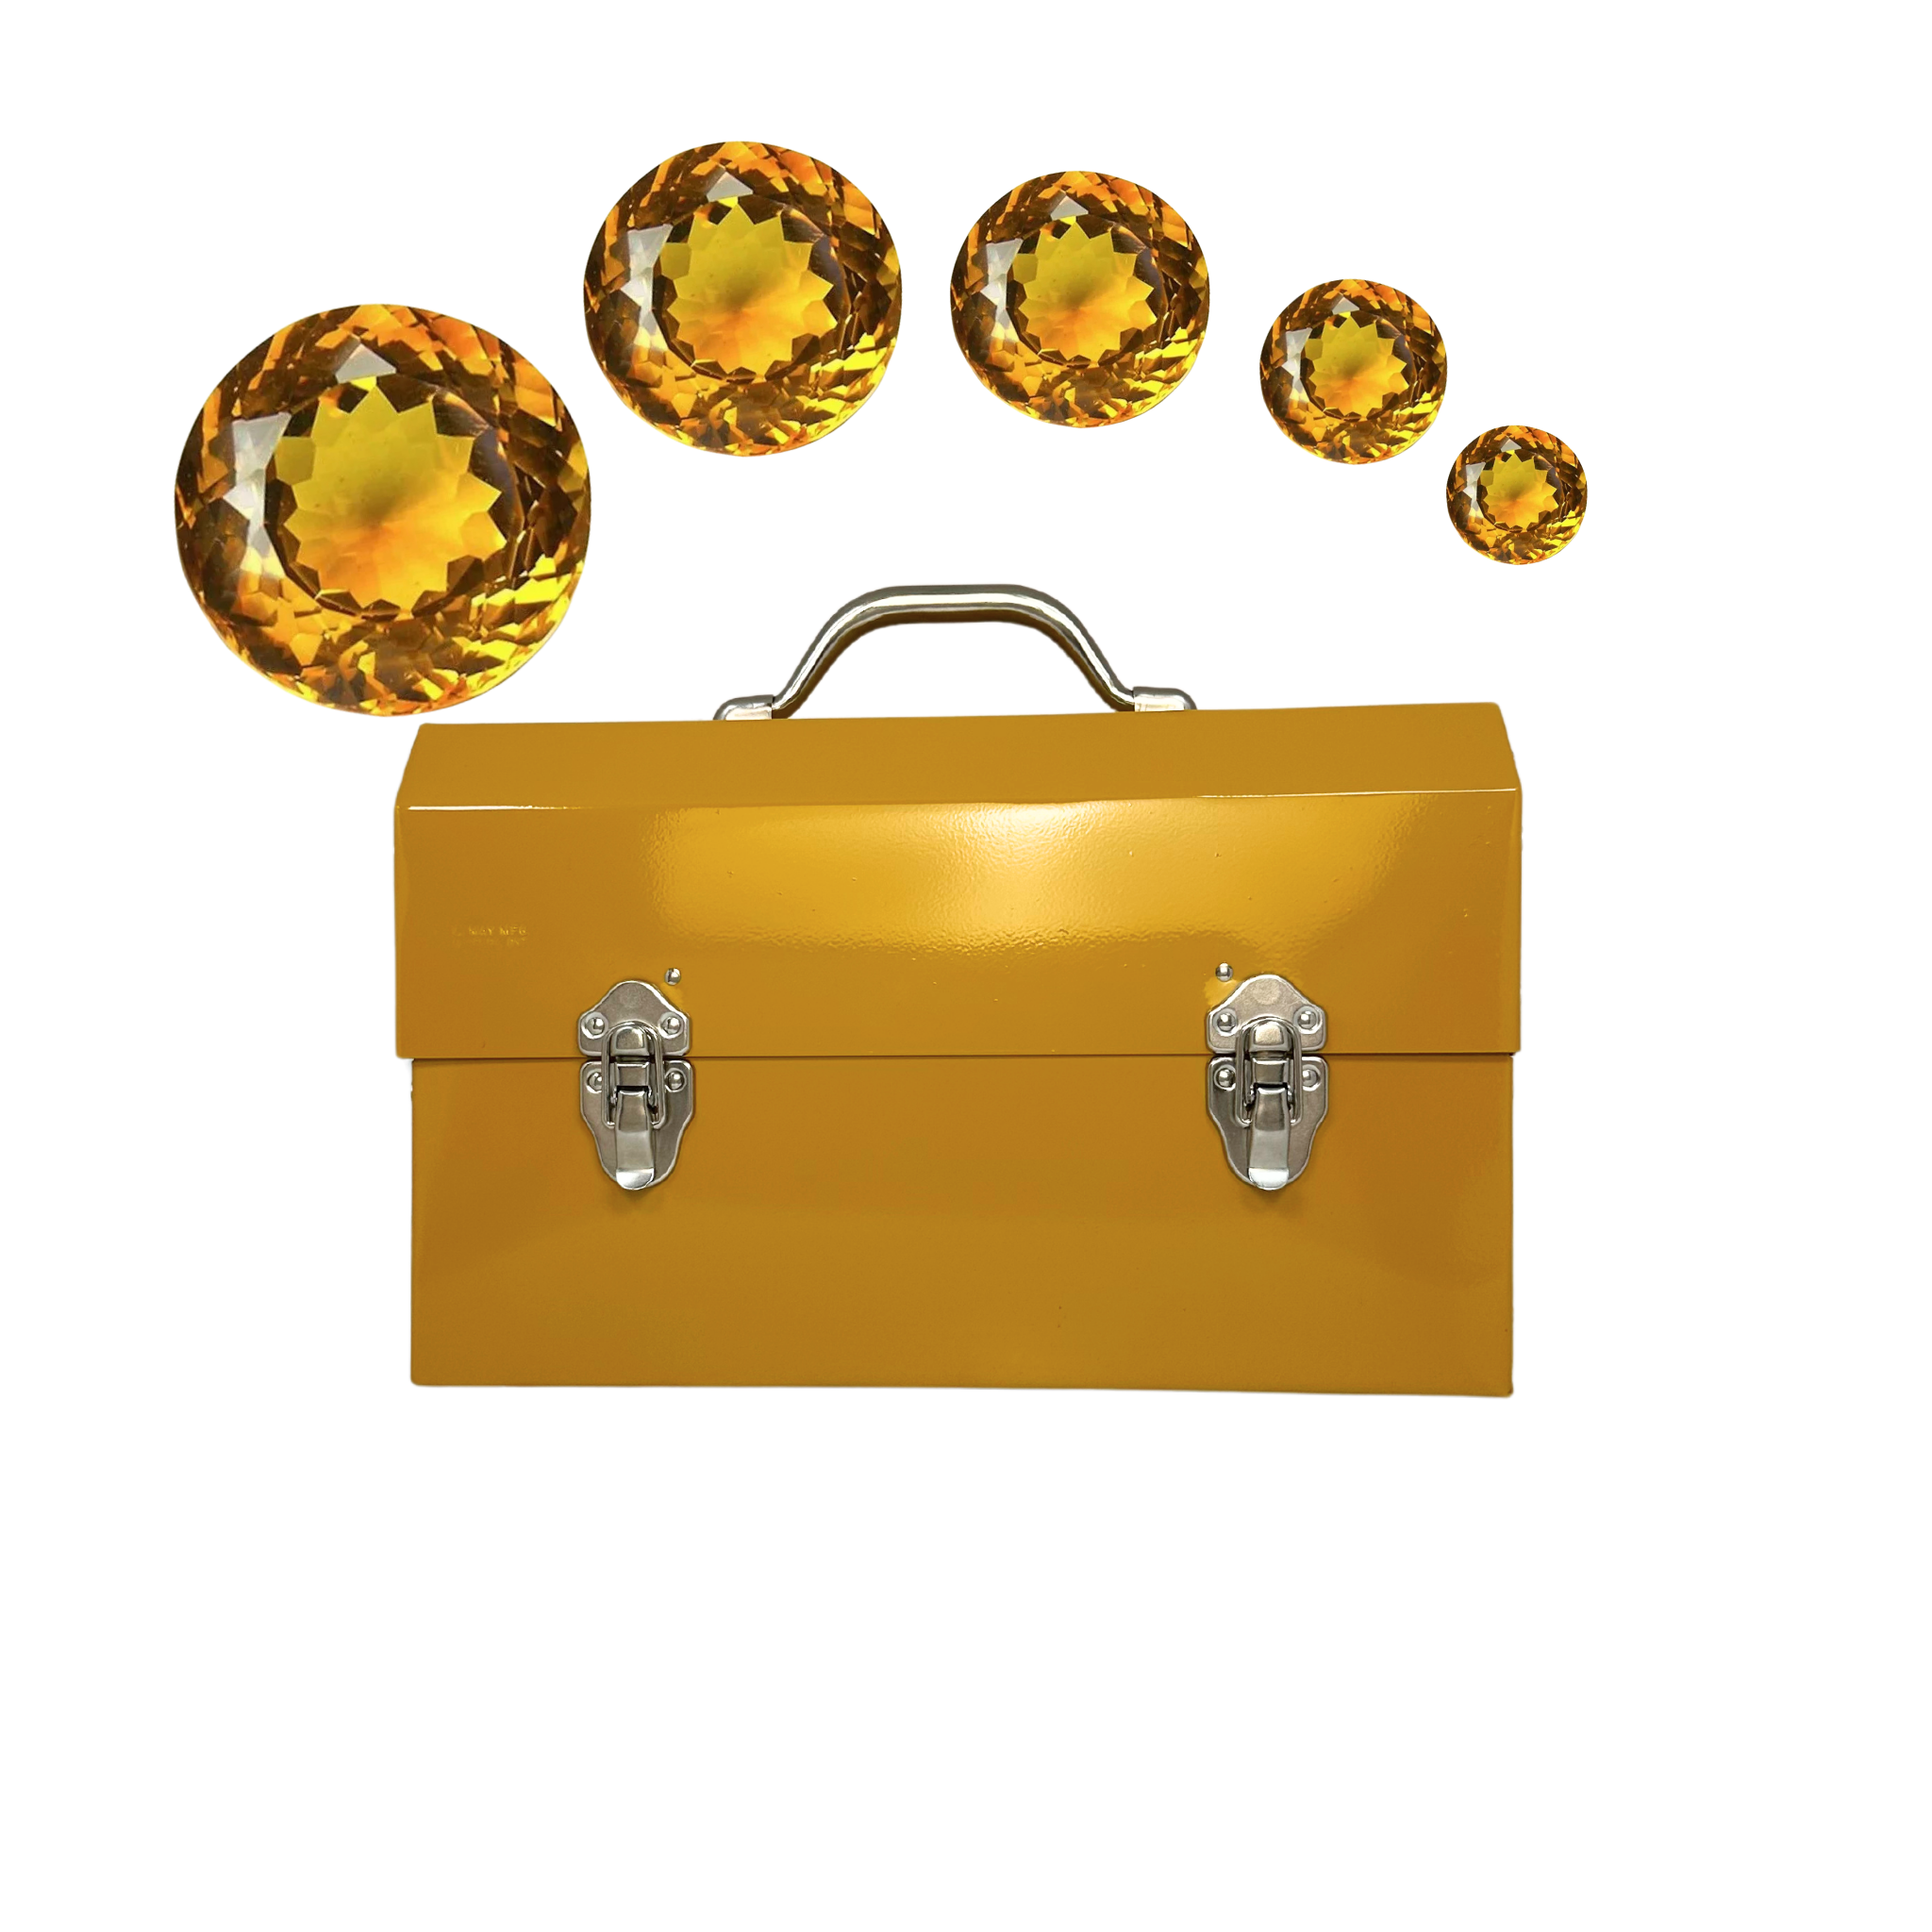 L. May aluminum lunchbox powder coated in yellow for the gemstone citrine collection